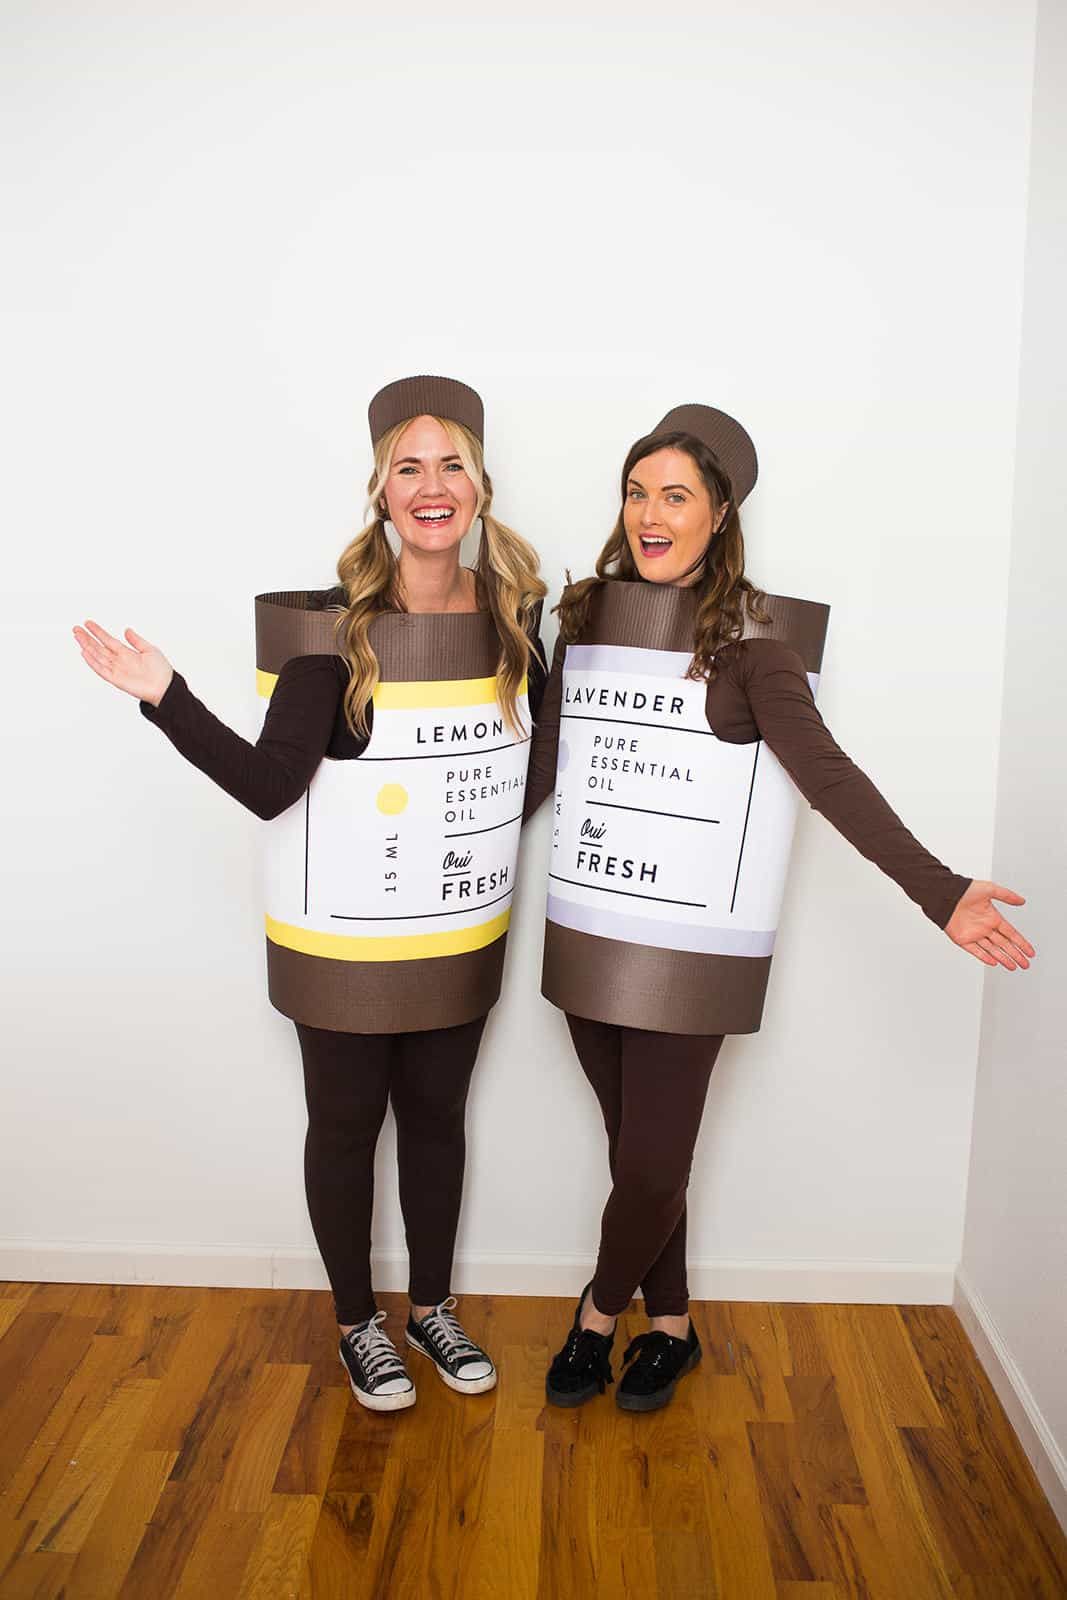 Pair Costume Ideas For Friends Outlet Styles, Save 52% | jlcatj.gob.mx